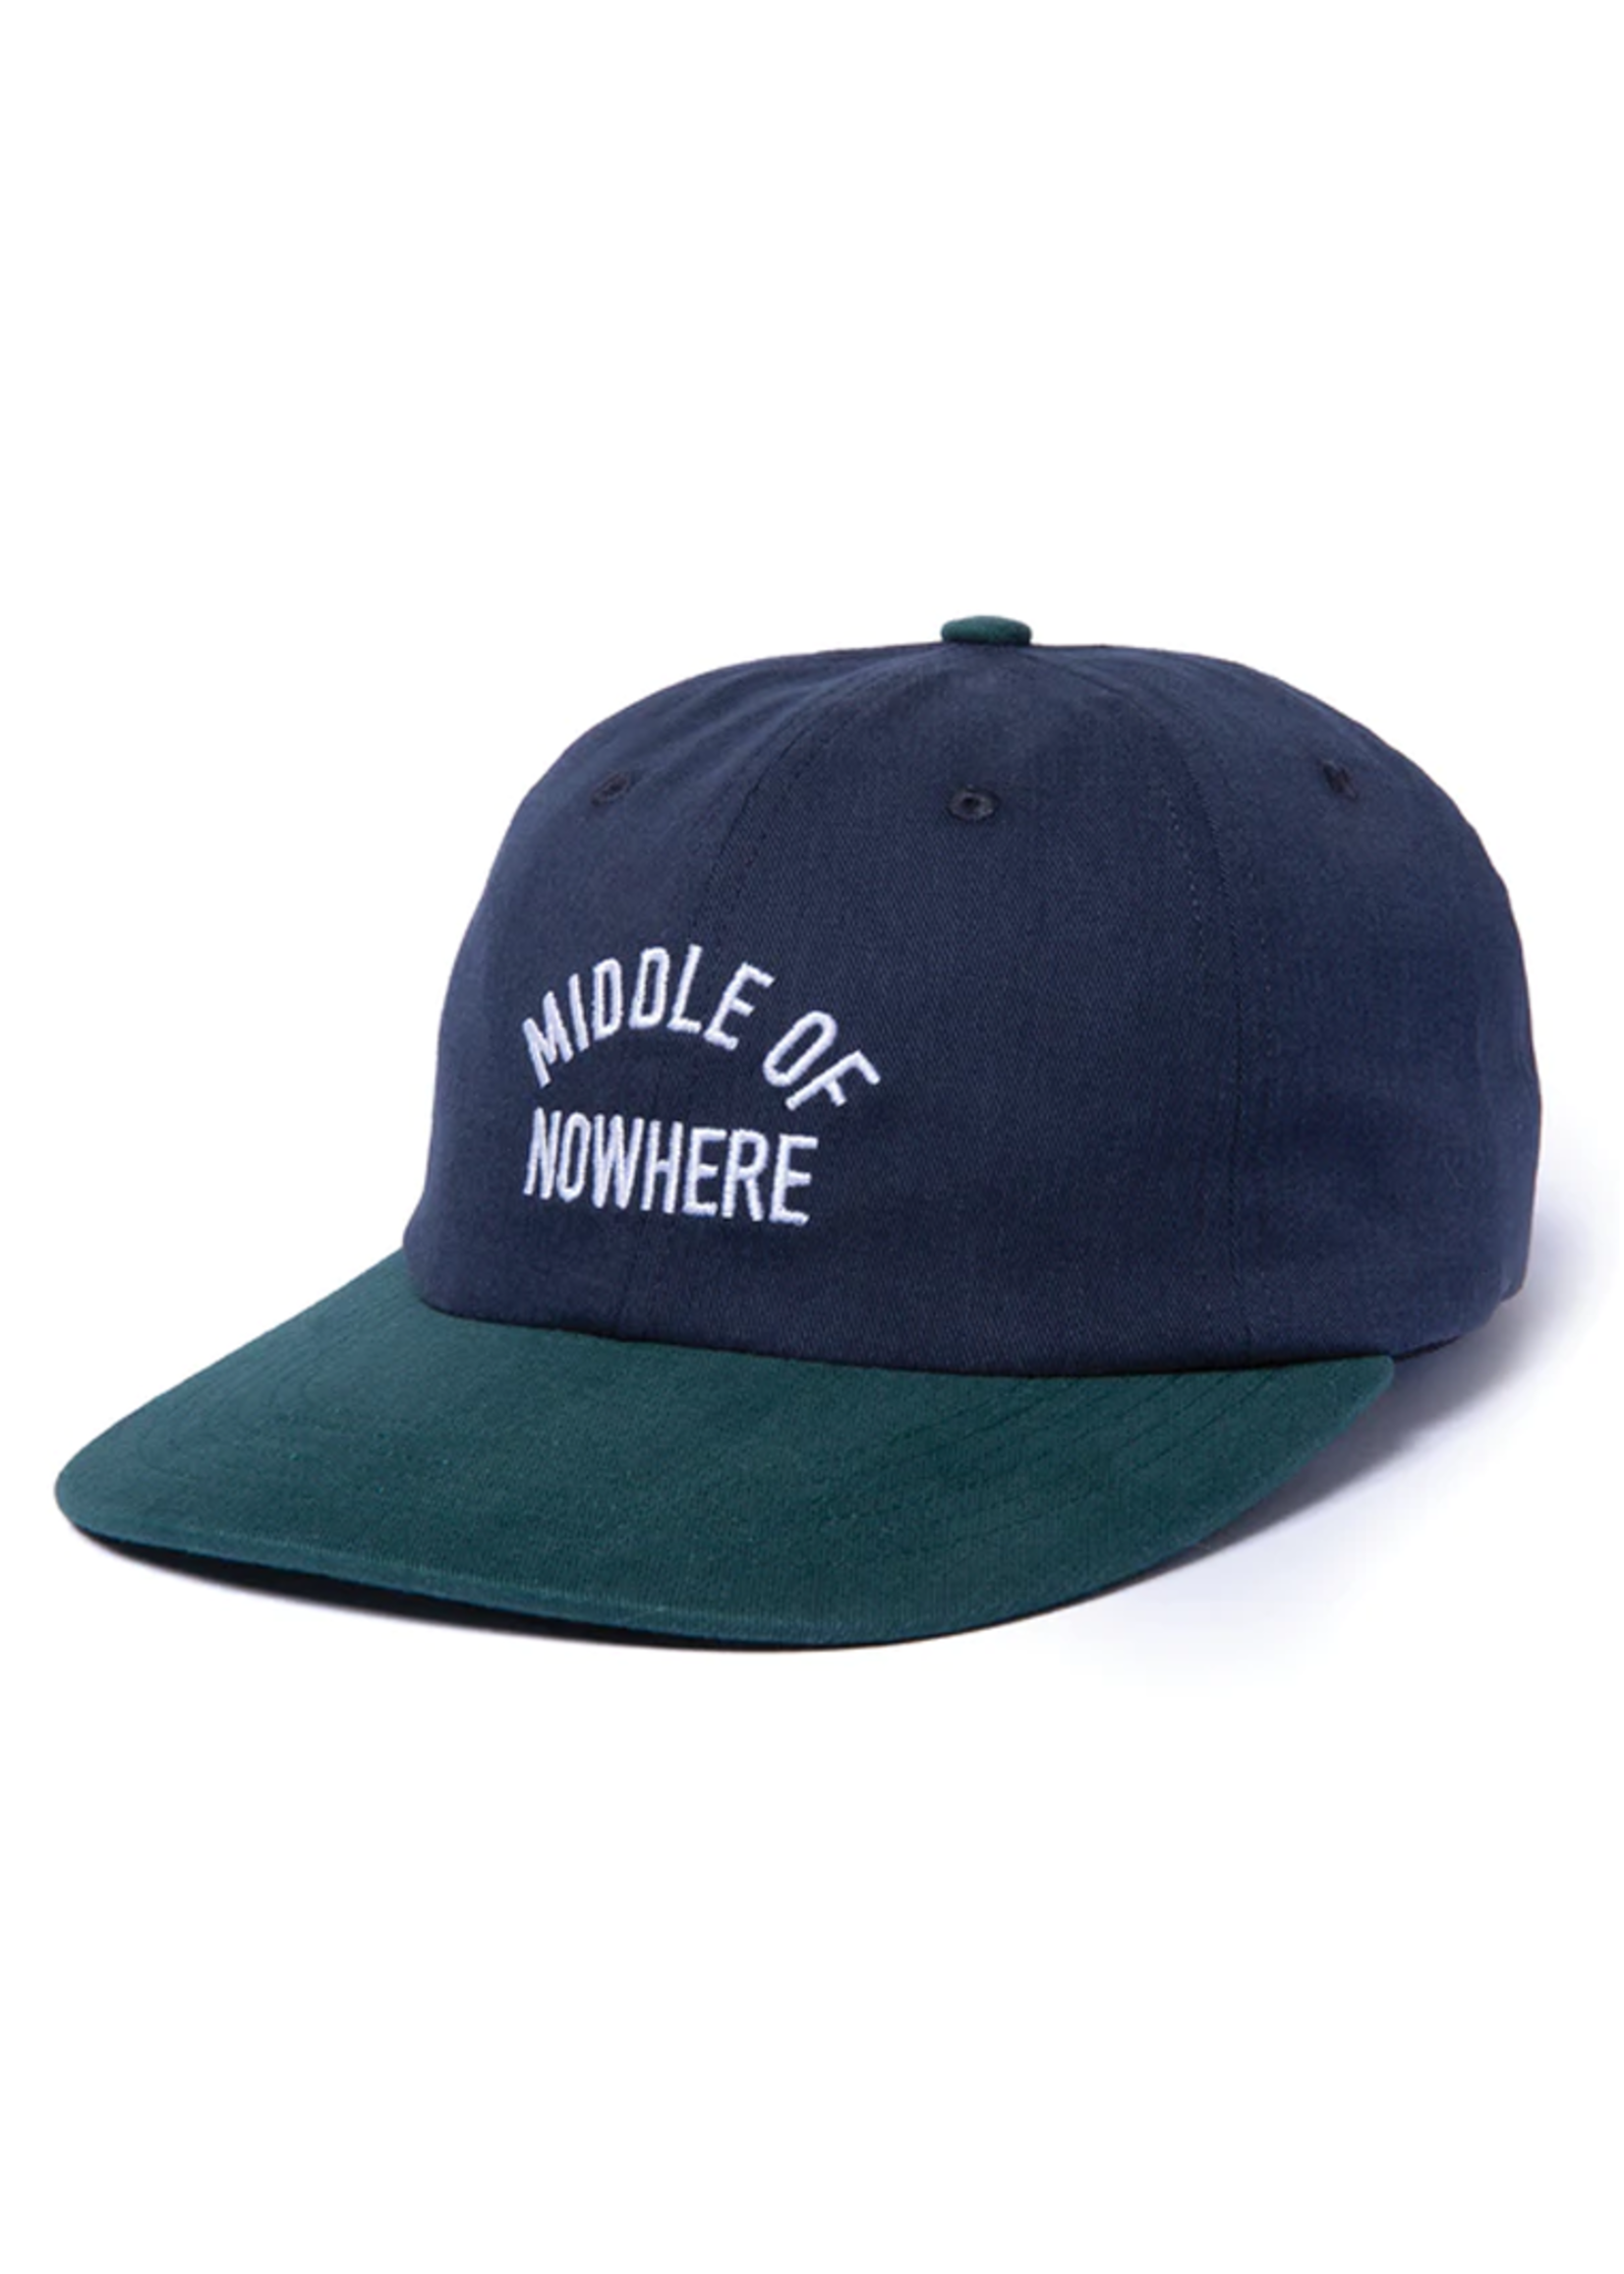 THE QUIET LIFE MIDDLE OF NOWHERE POLO HAT